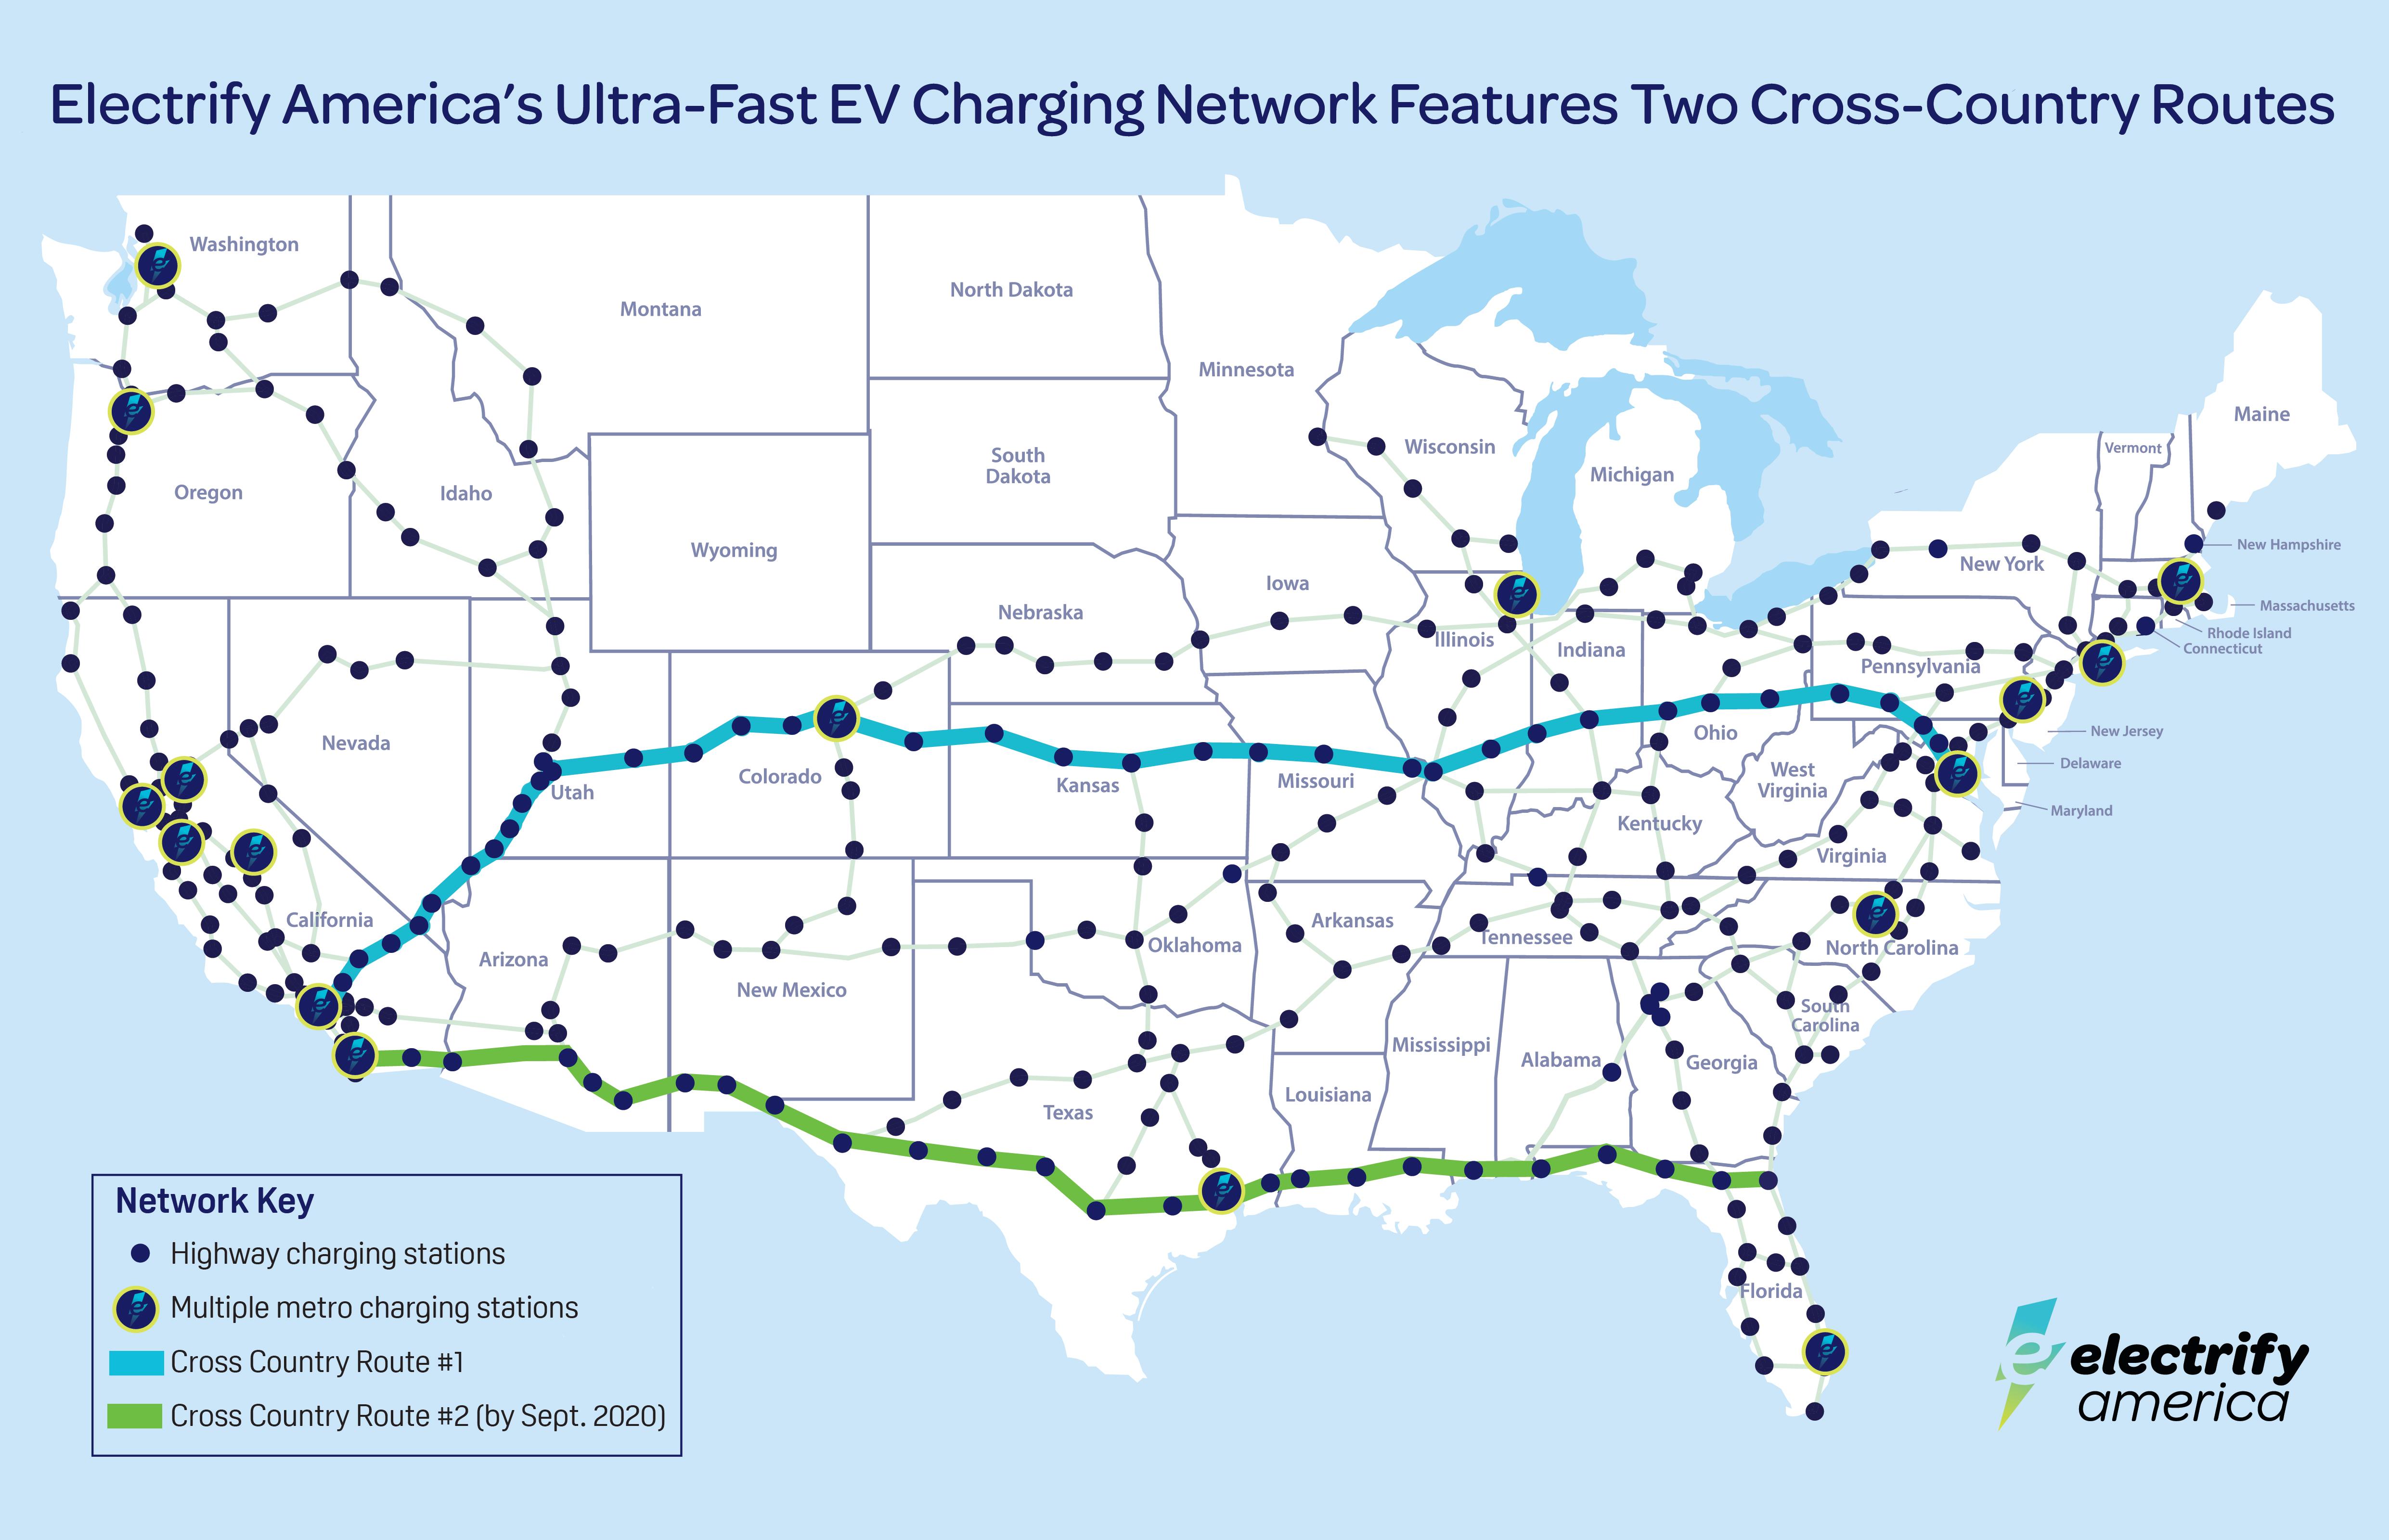 Electrify America’s first crosscountry EV charging route is complete